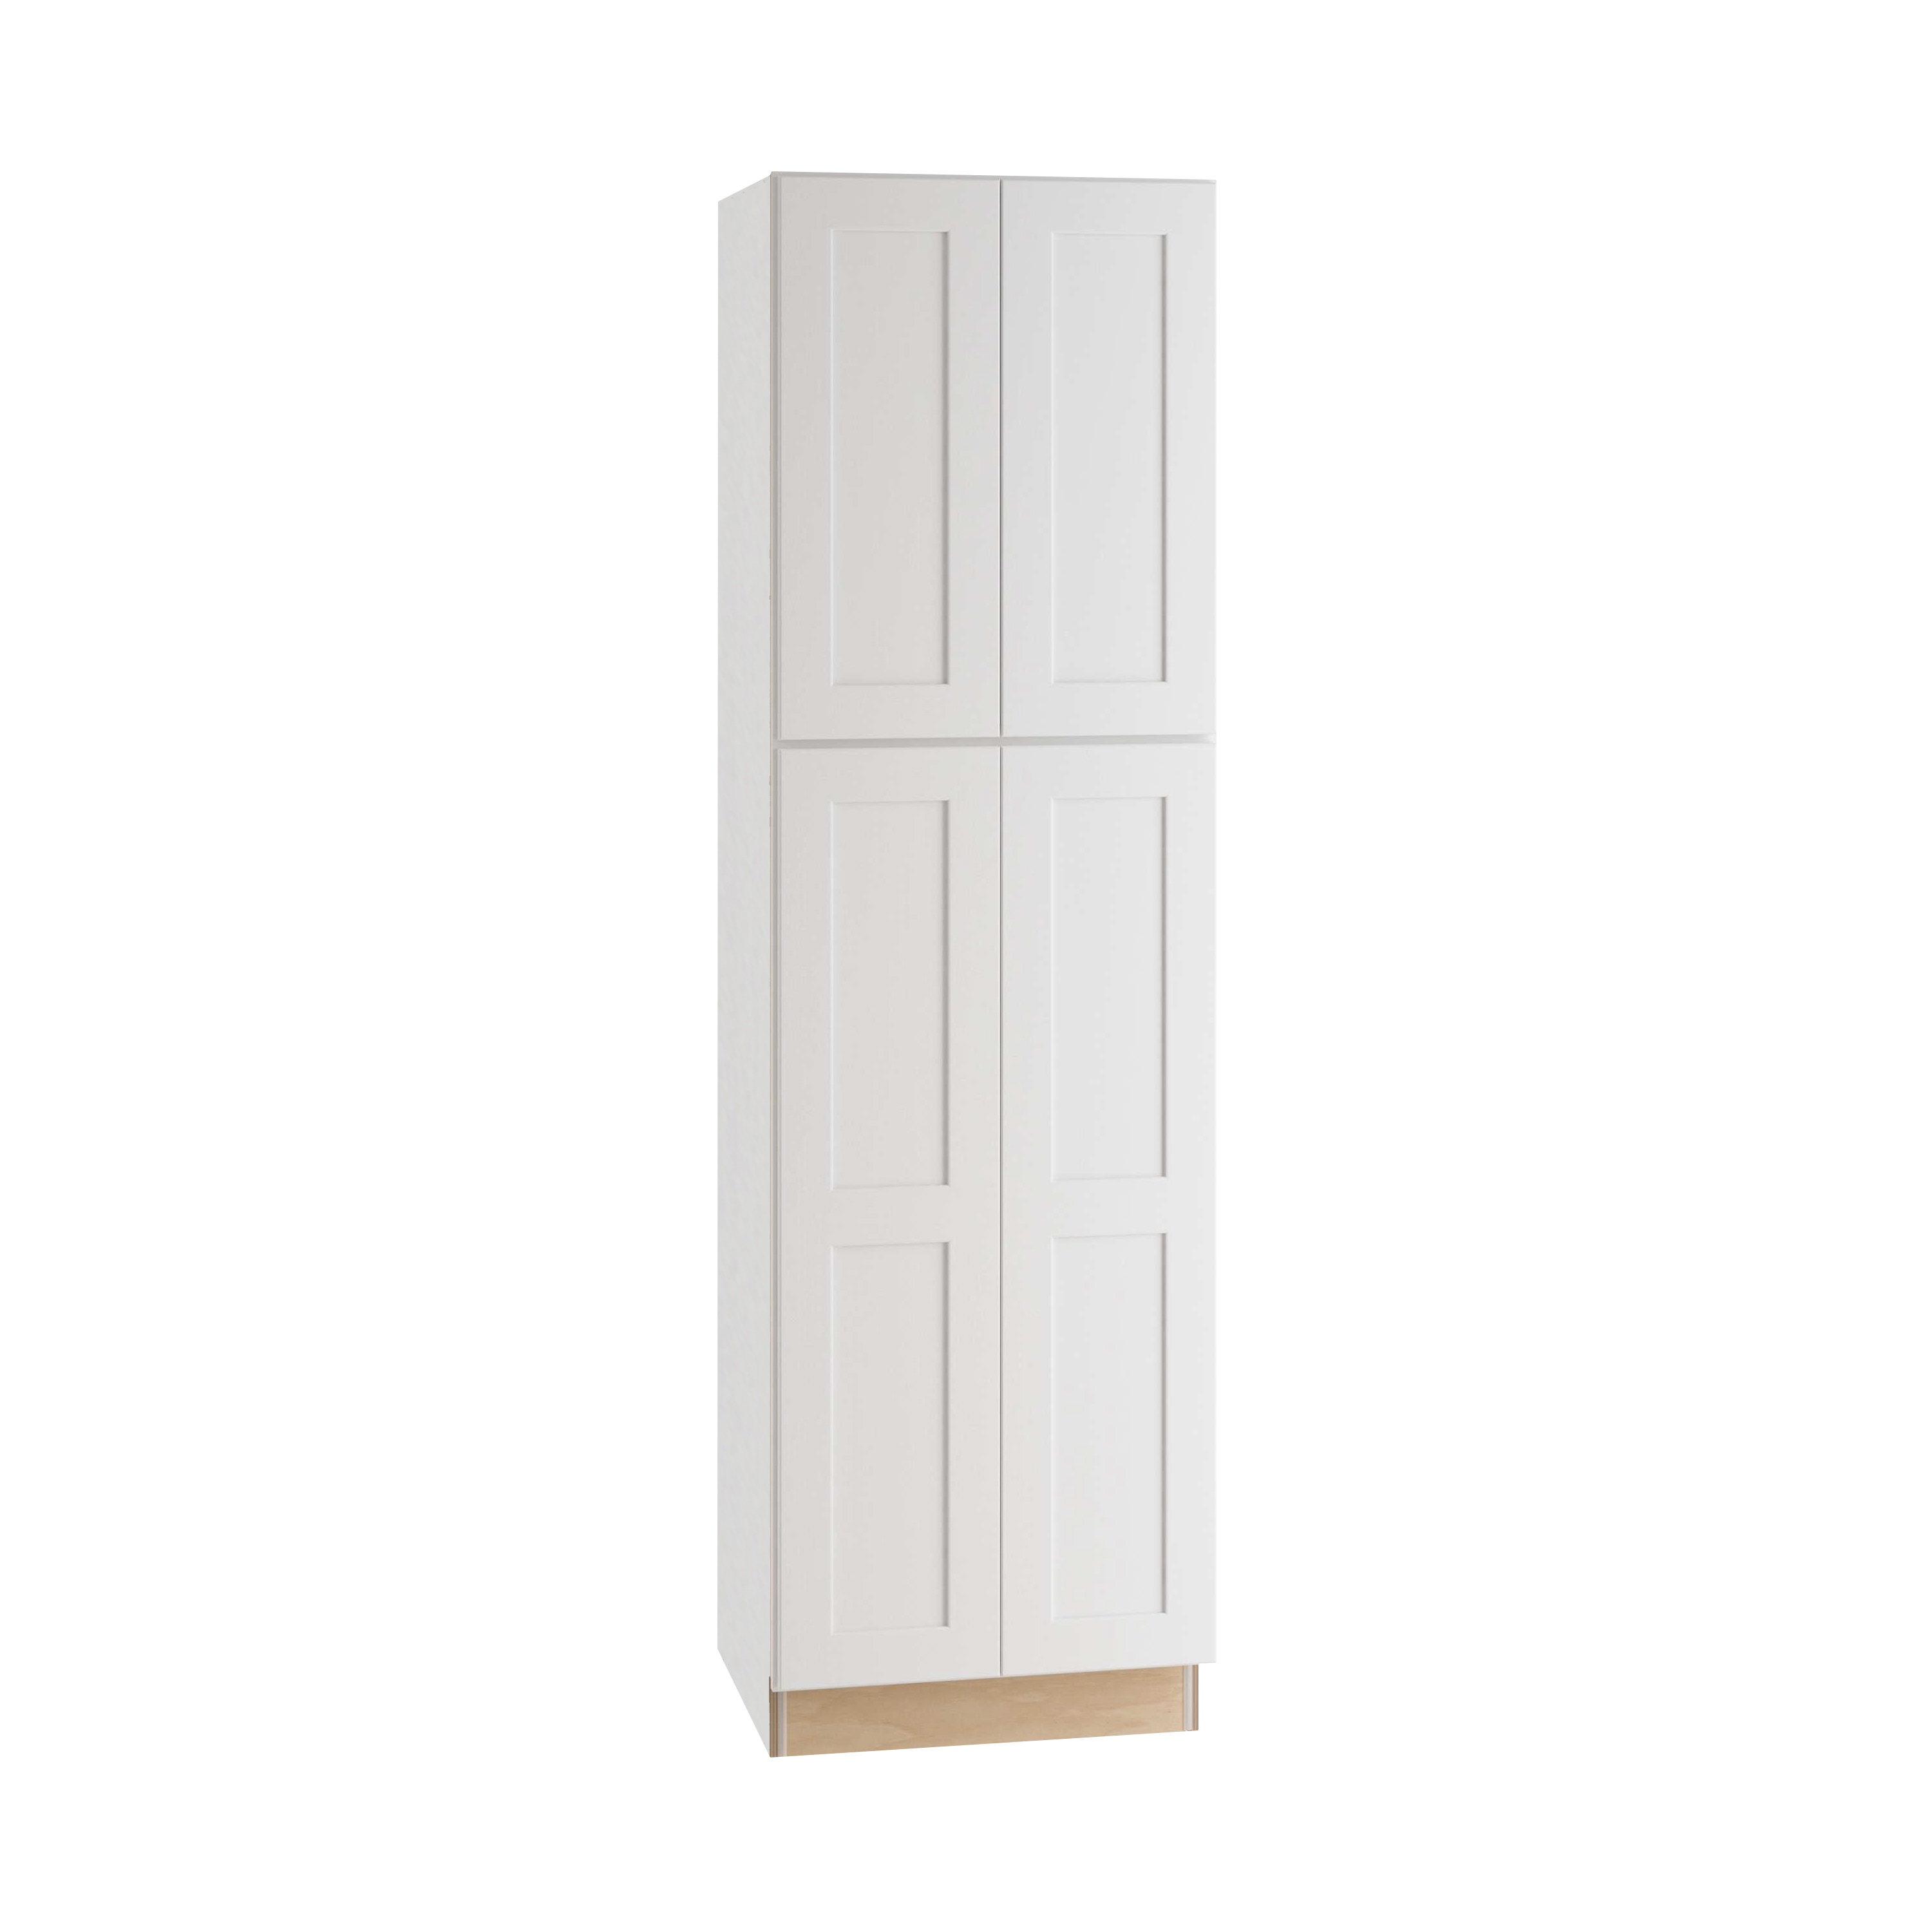 Luxxe Cabinetry Newhaven 24-in W x 90-in H x 24-in D Pure White Door ...